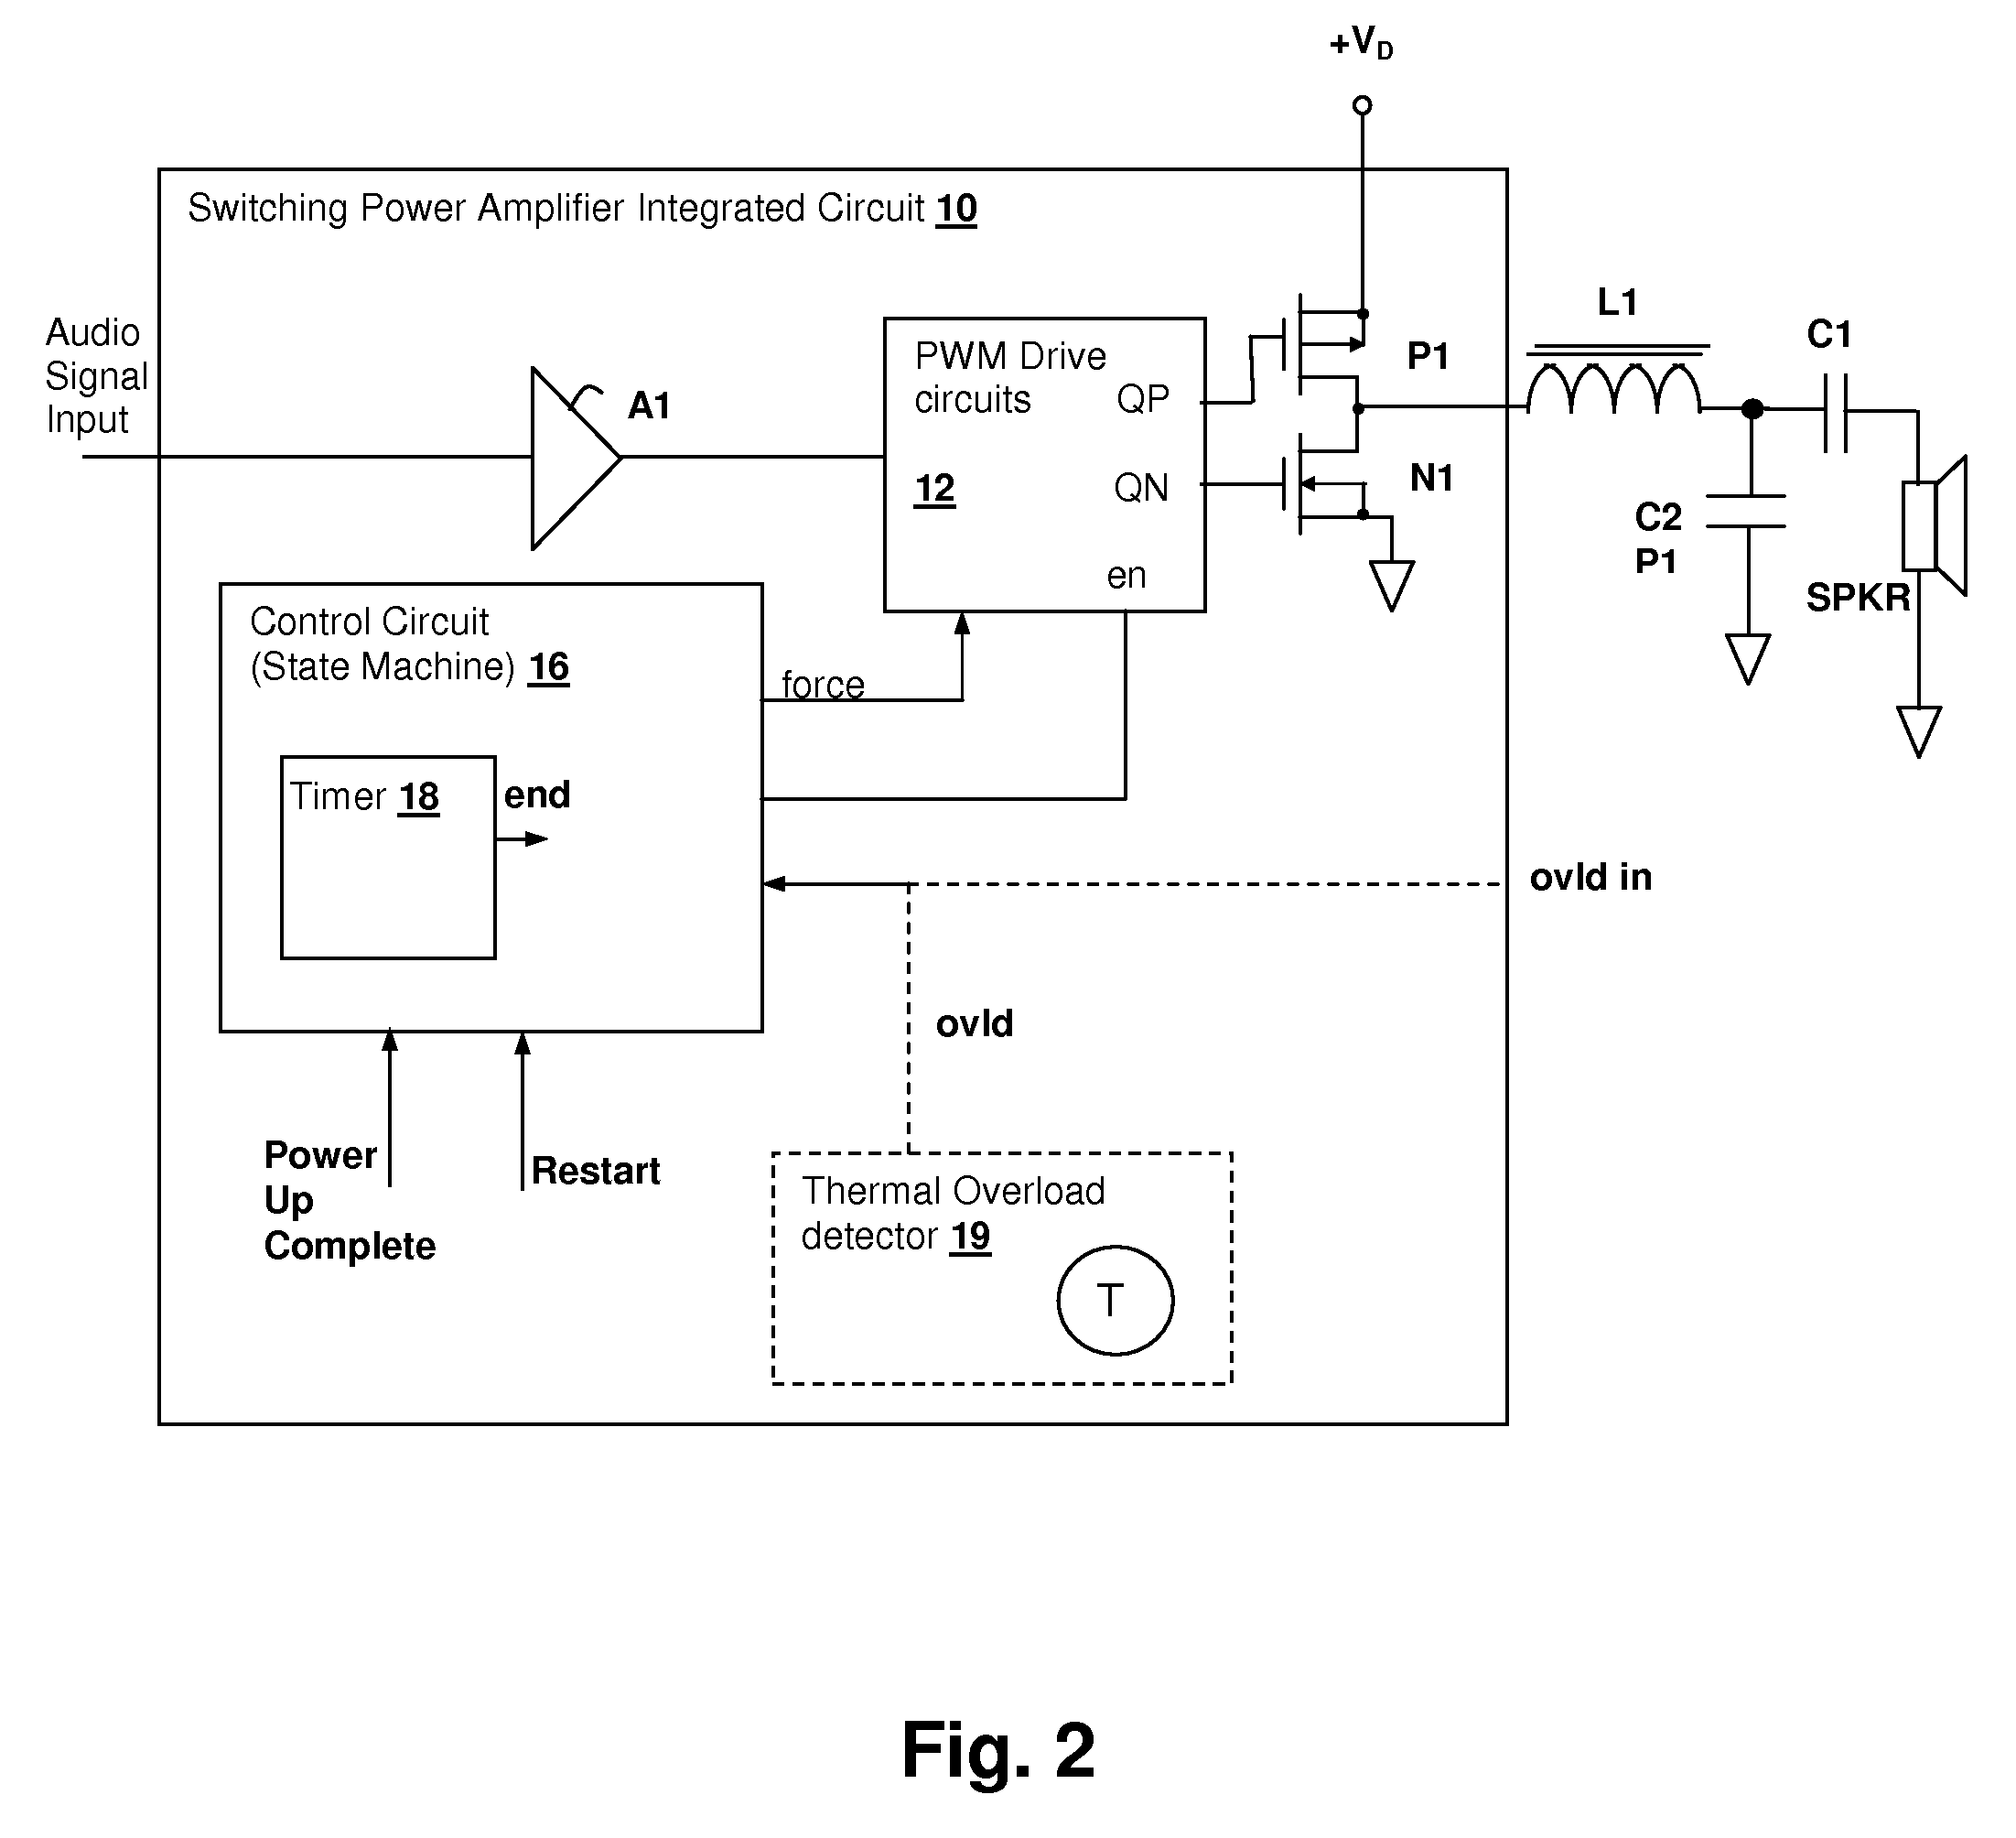 Thermal overload protection circuit and method for protecting switching power amplifier circuits